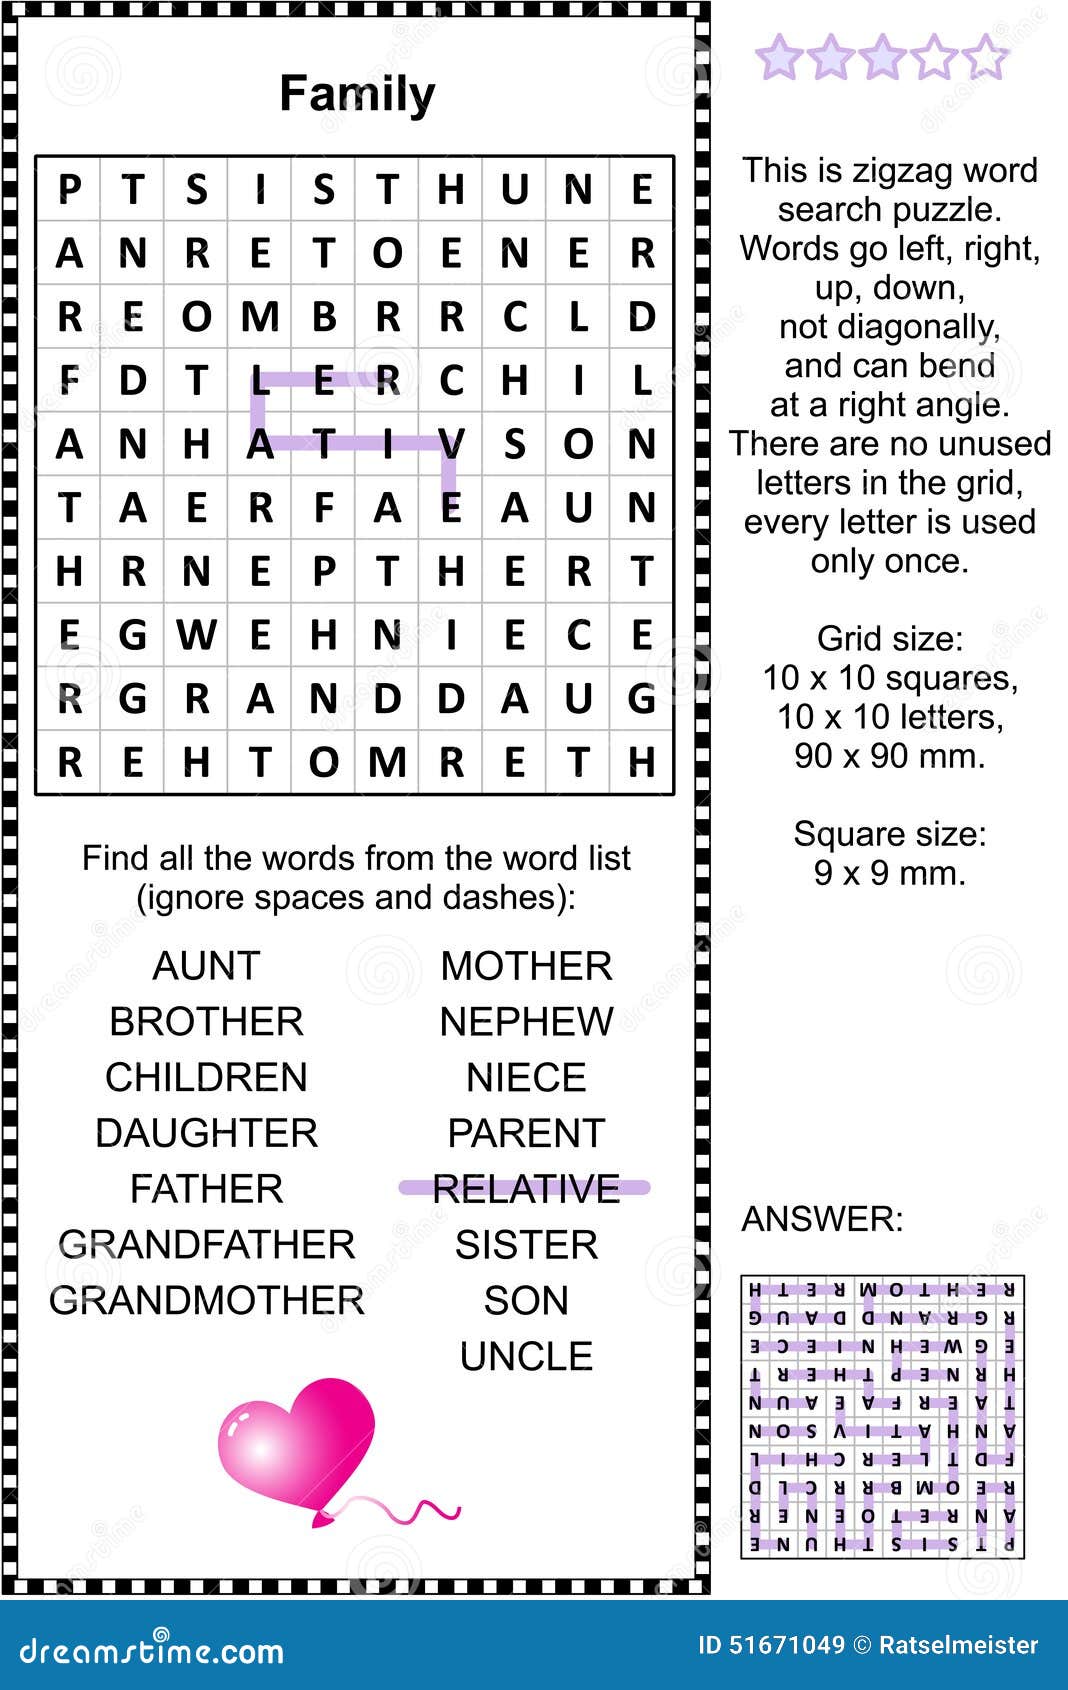 Word grid challenge. Wordsearch relatives. Grid Family. Find 31 Words related to Family in the Grid. Word Grids Rosenberg.